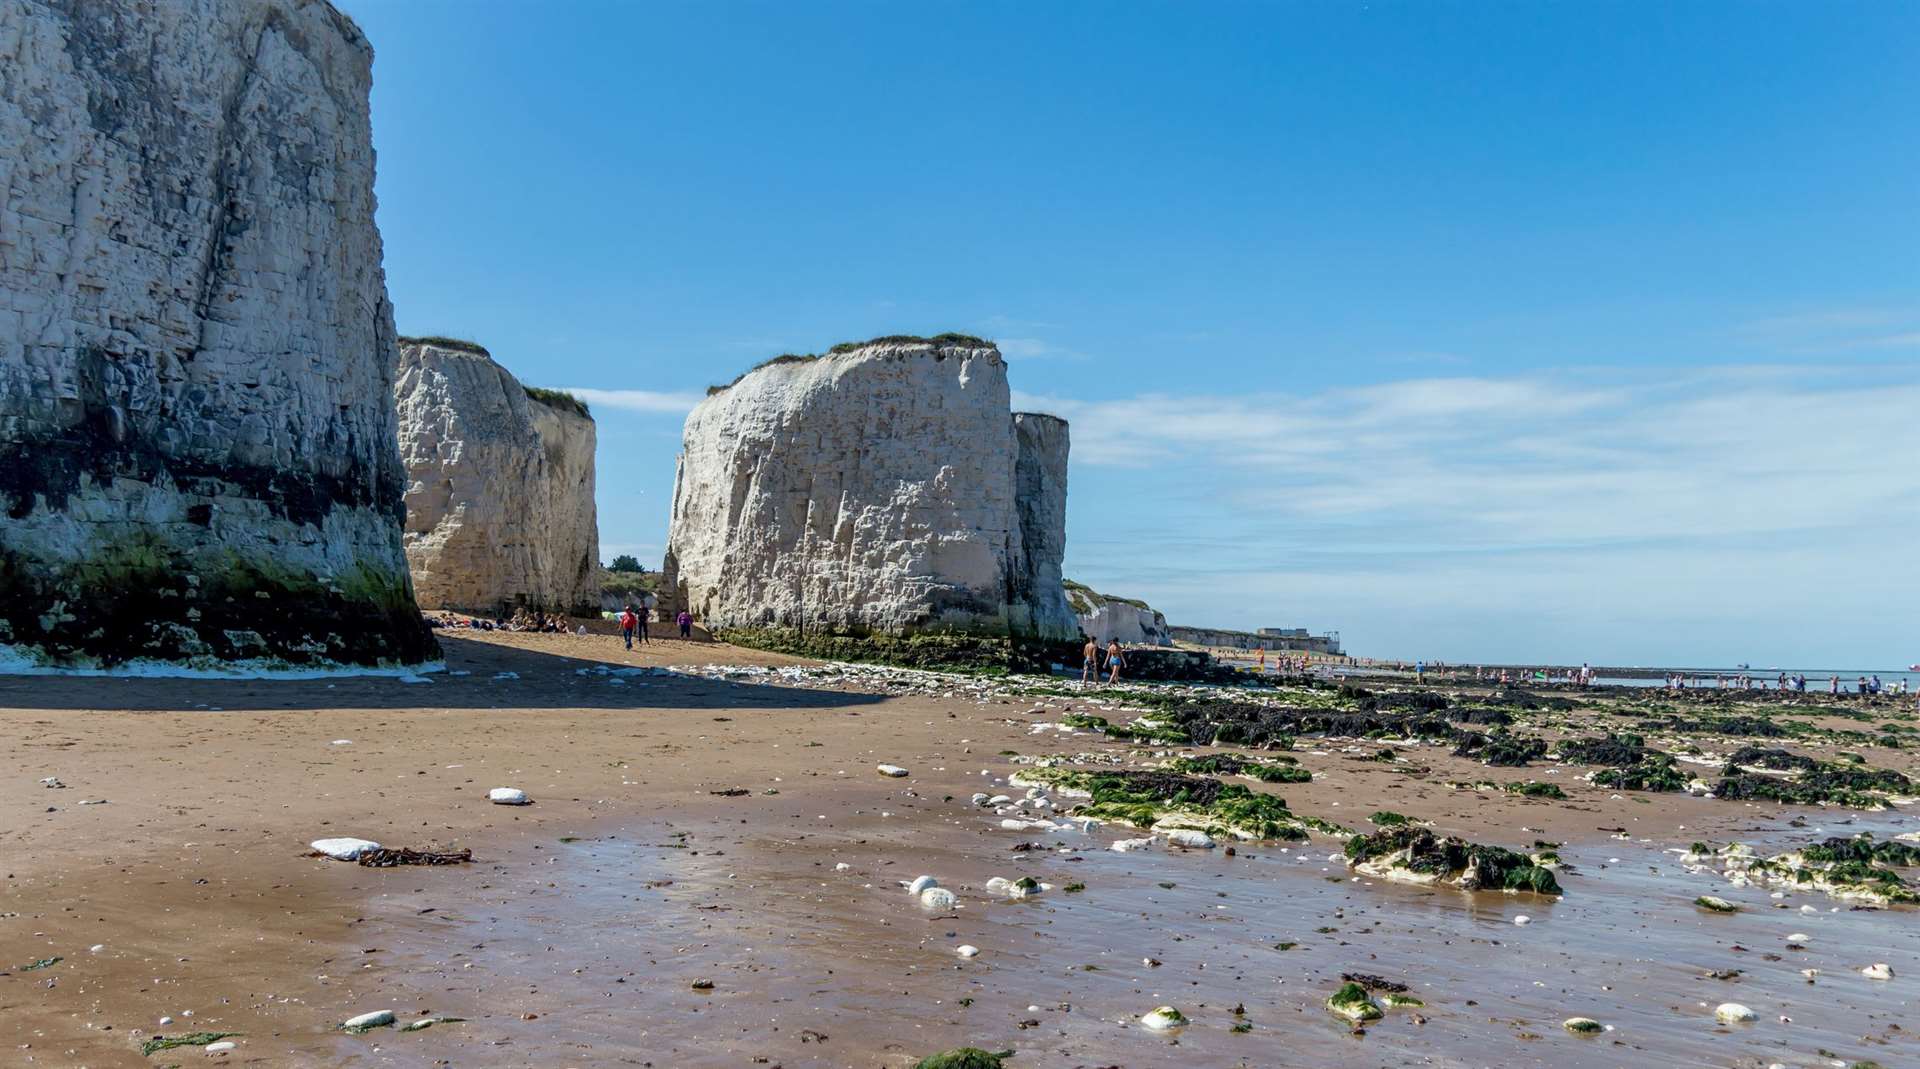 The beaches of Thanet are popular with locals and visitors alike